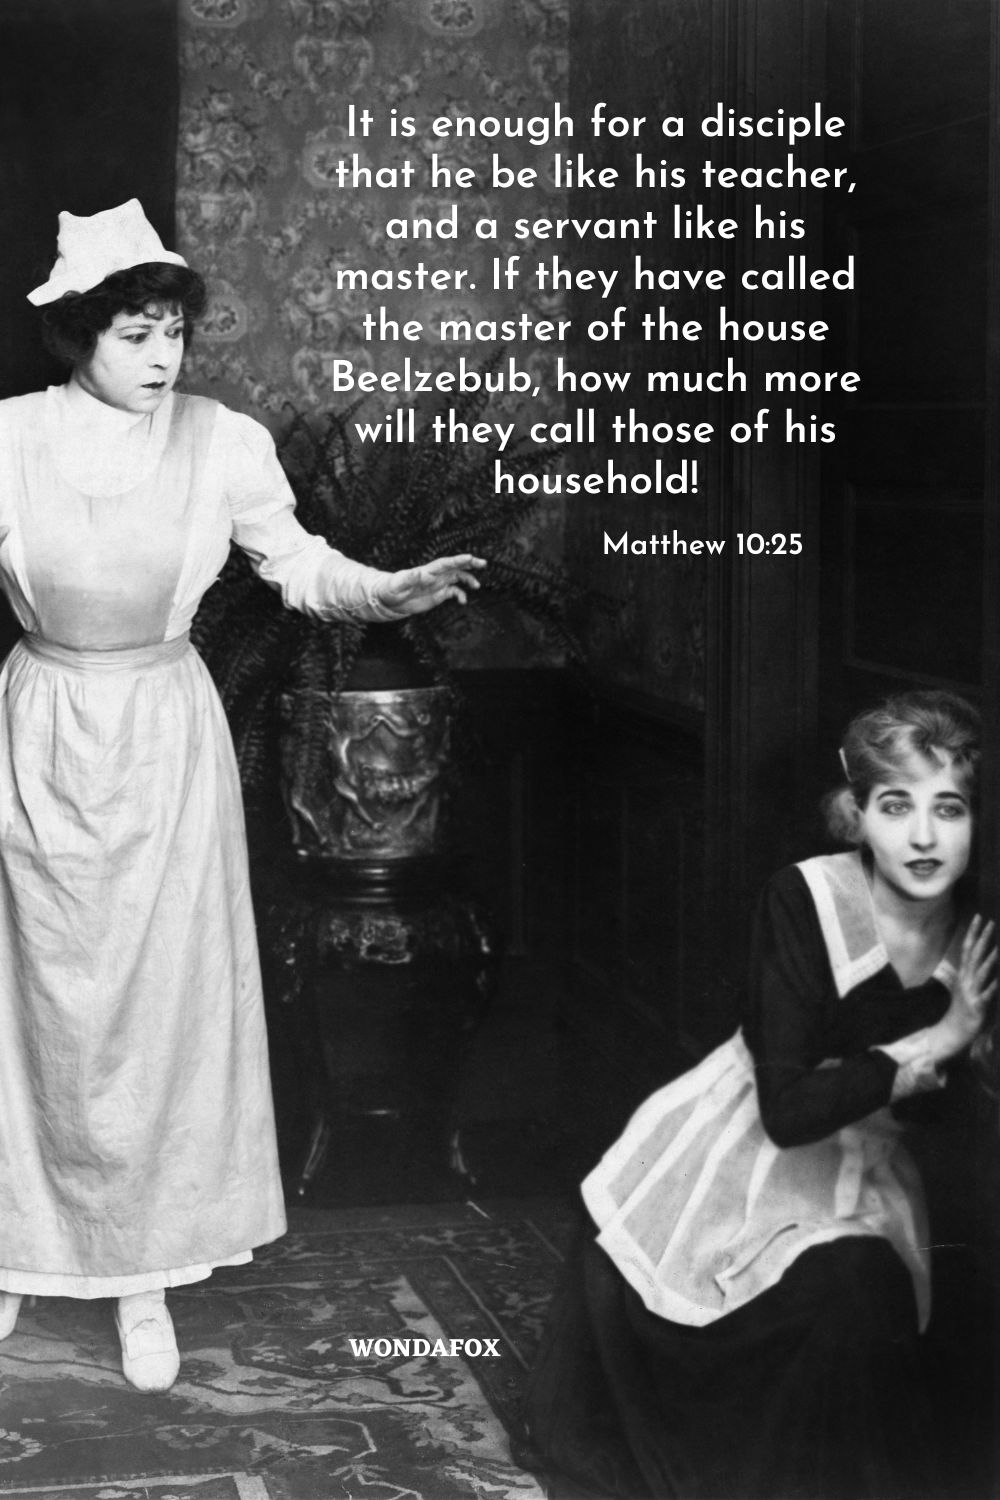 It is enough for a disciple that he be like his teacher, and a servant like his master. If they have called the master of the house Beelzebub, how much more will they call those of his household!
Matthew 10:25